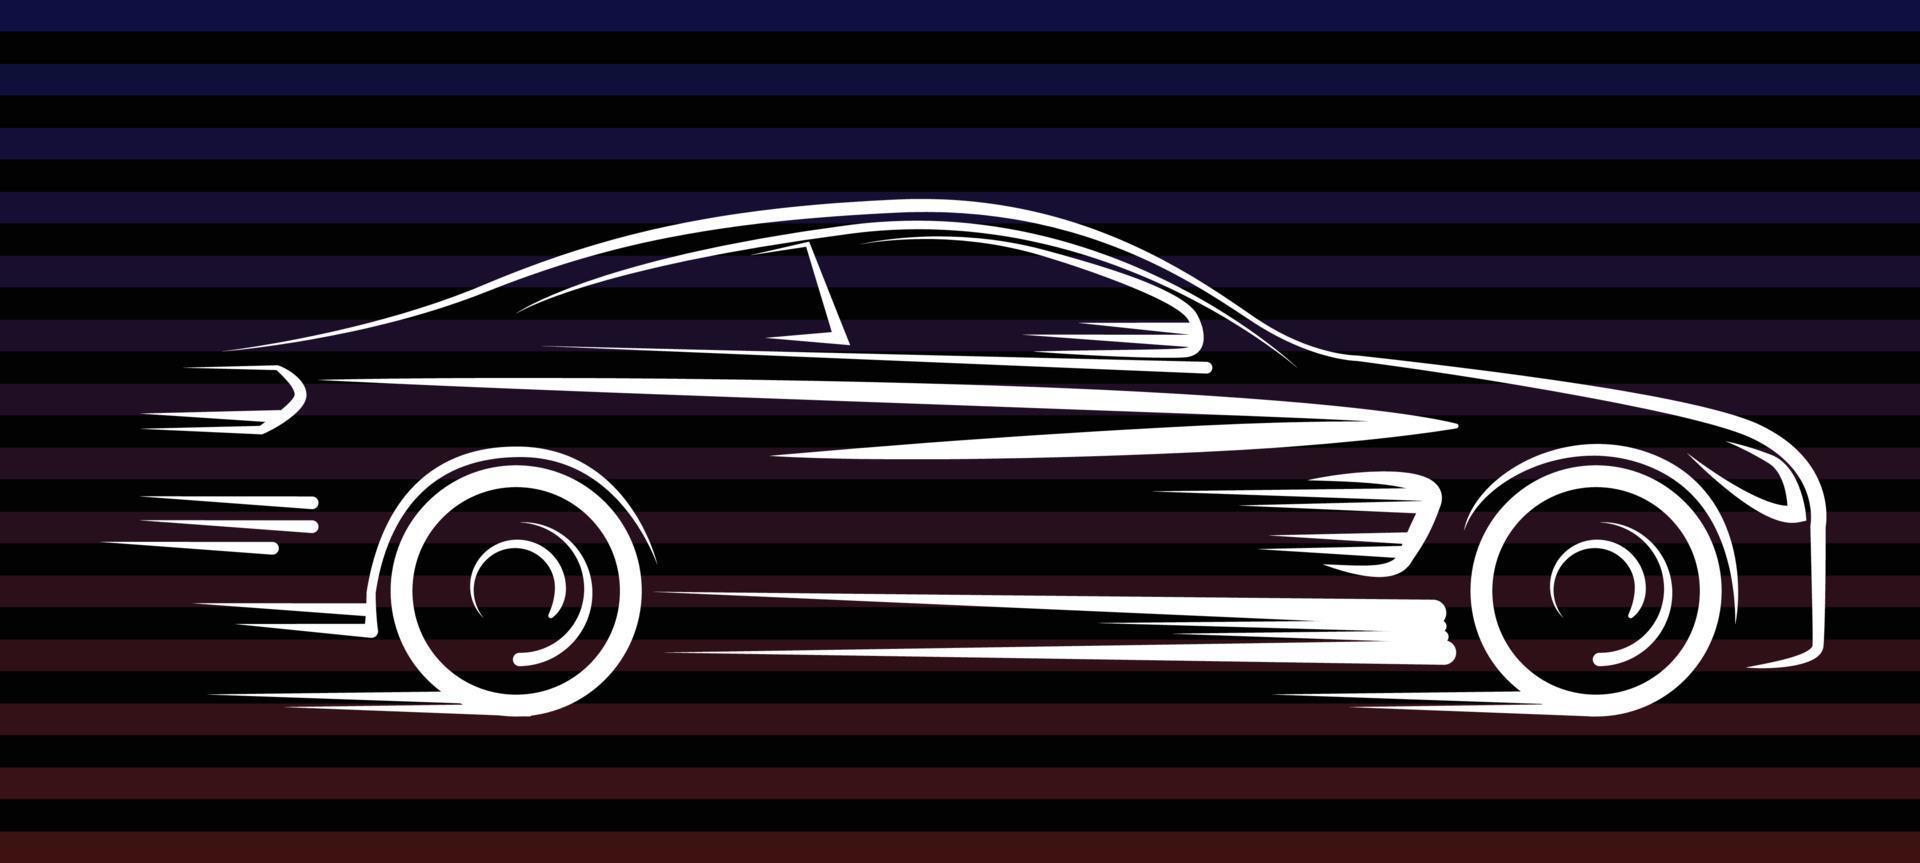 speed car racing on white line vector